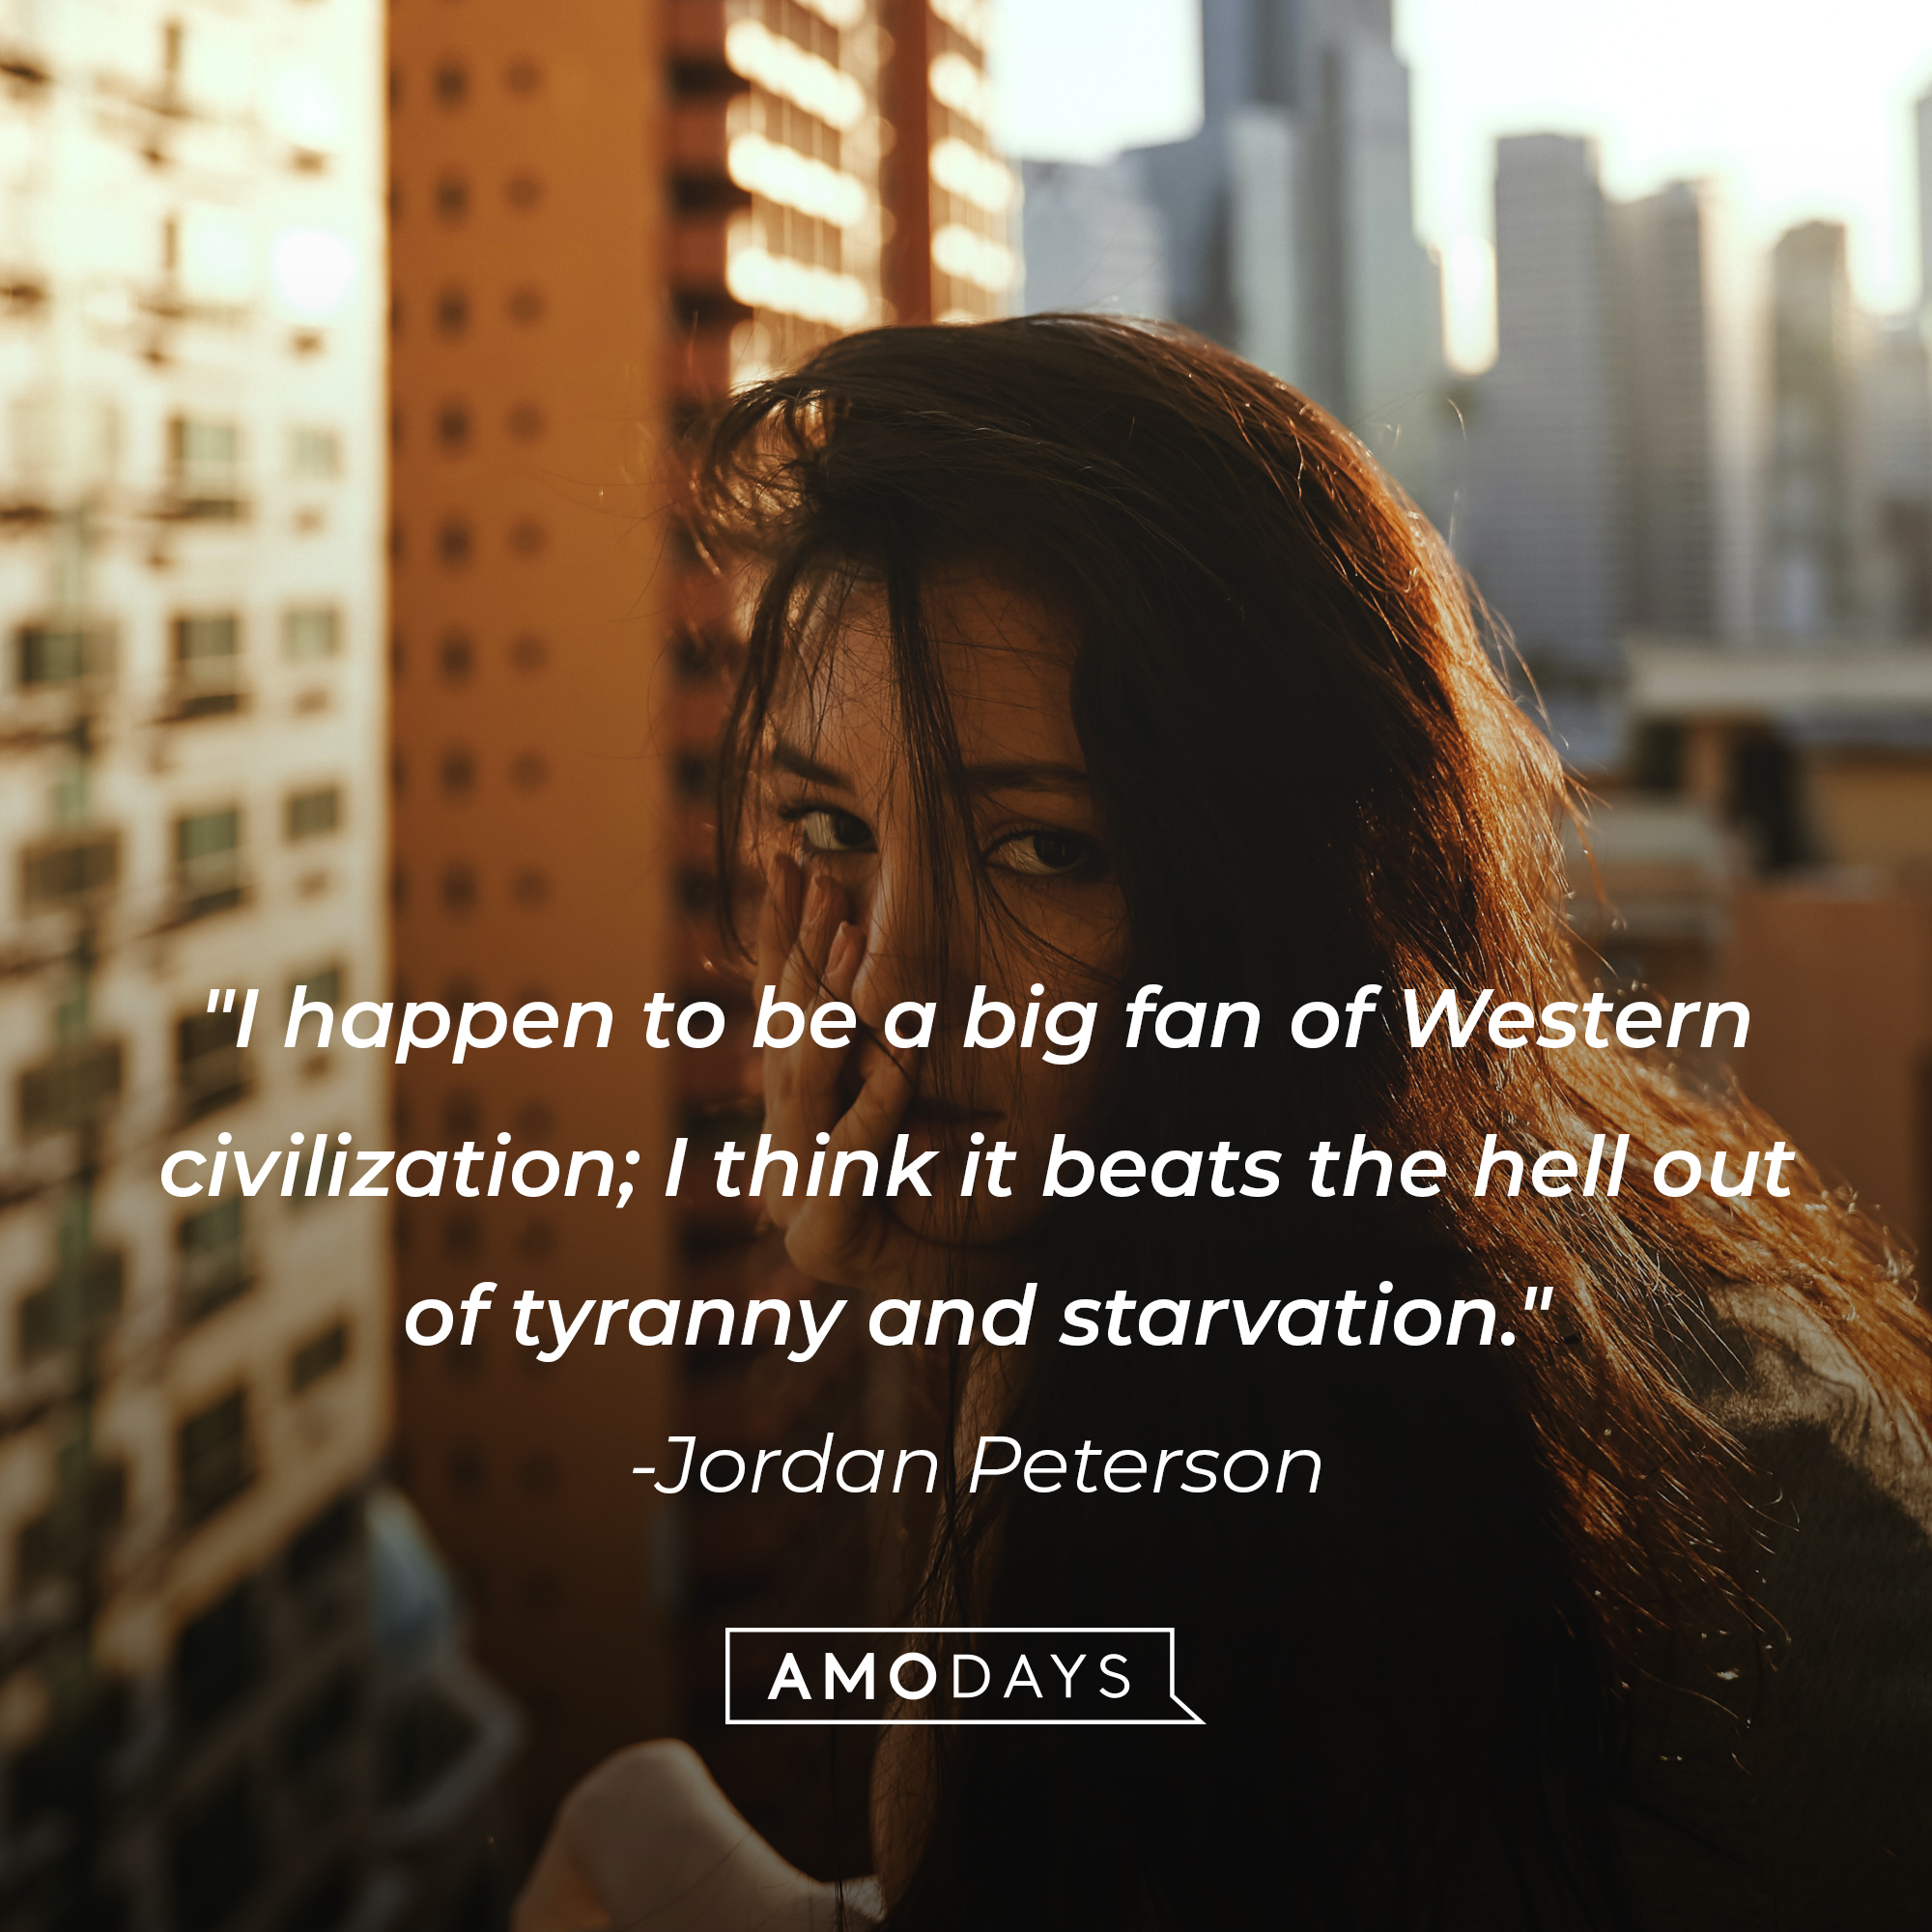 Jordan Peterson's quote: "I happen to be a big fan of Western civilization; I think it beats the hell out of tyranny and starvation." | Image: AmoDays